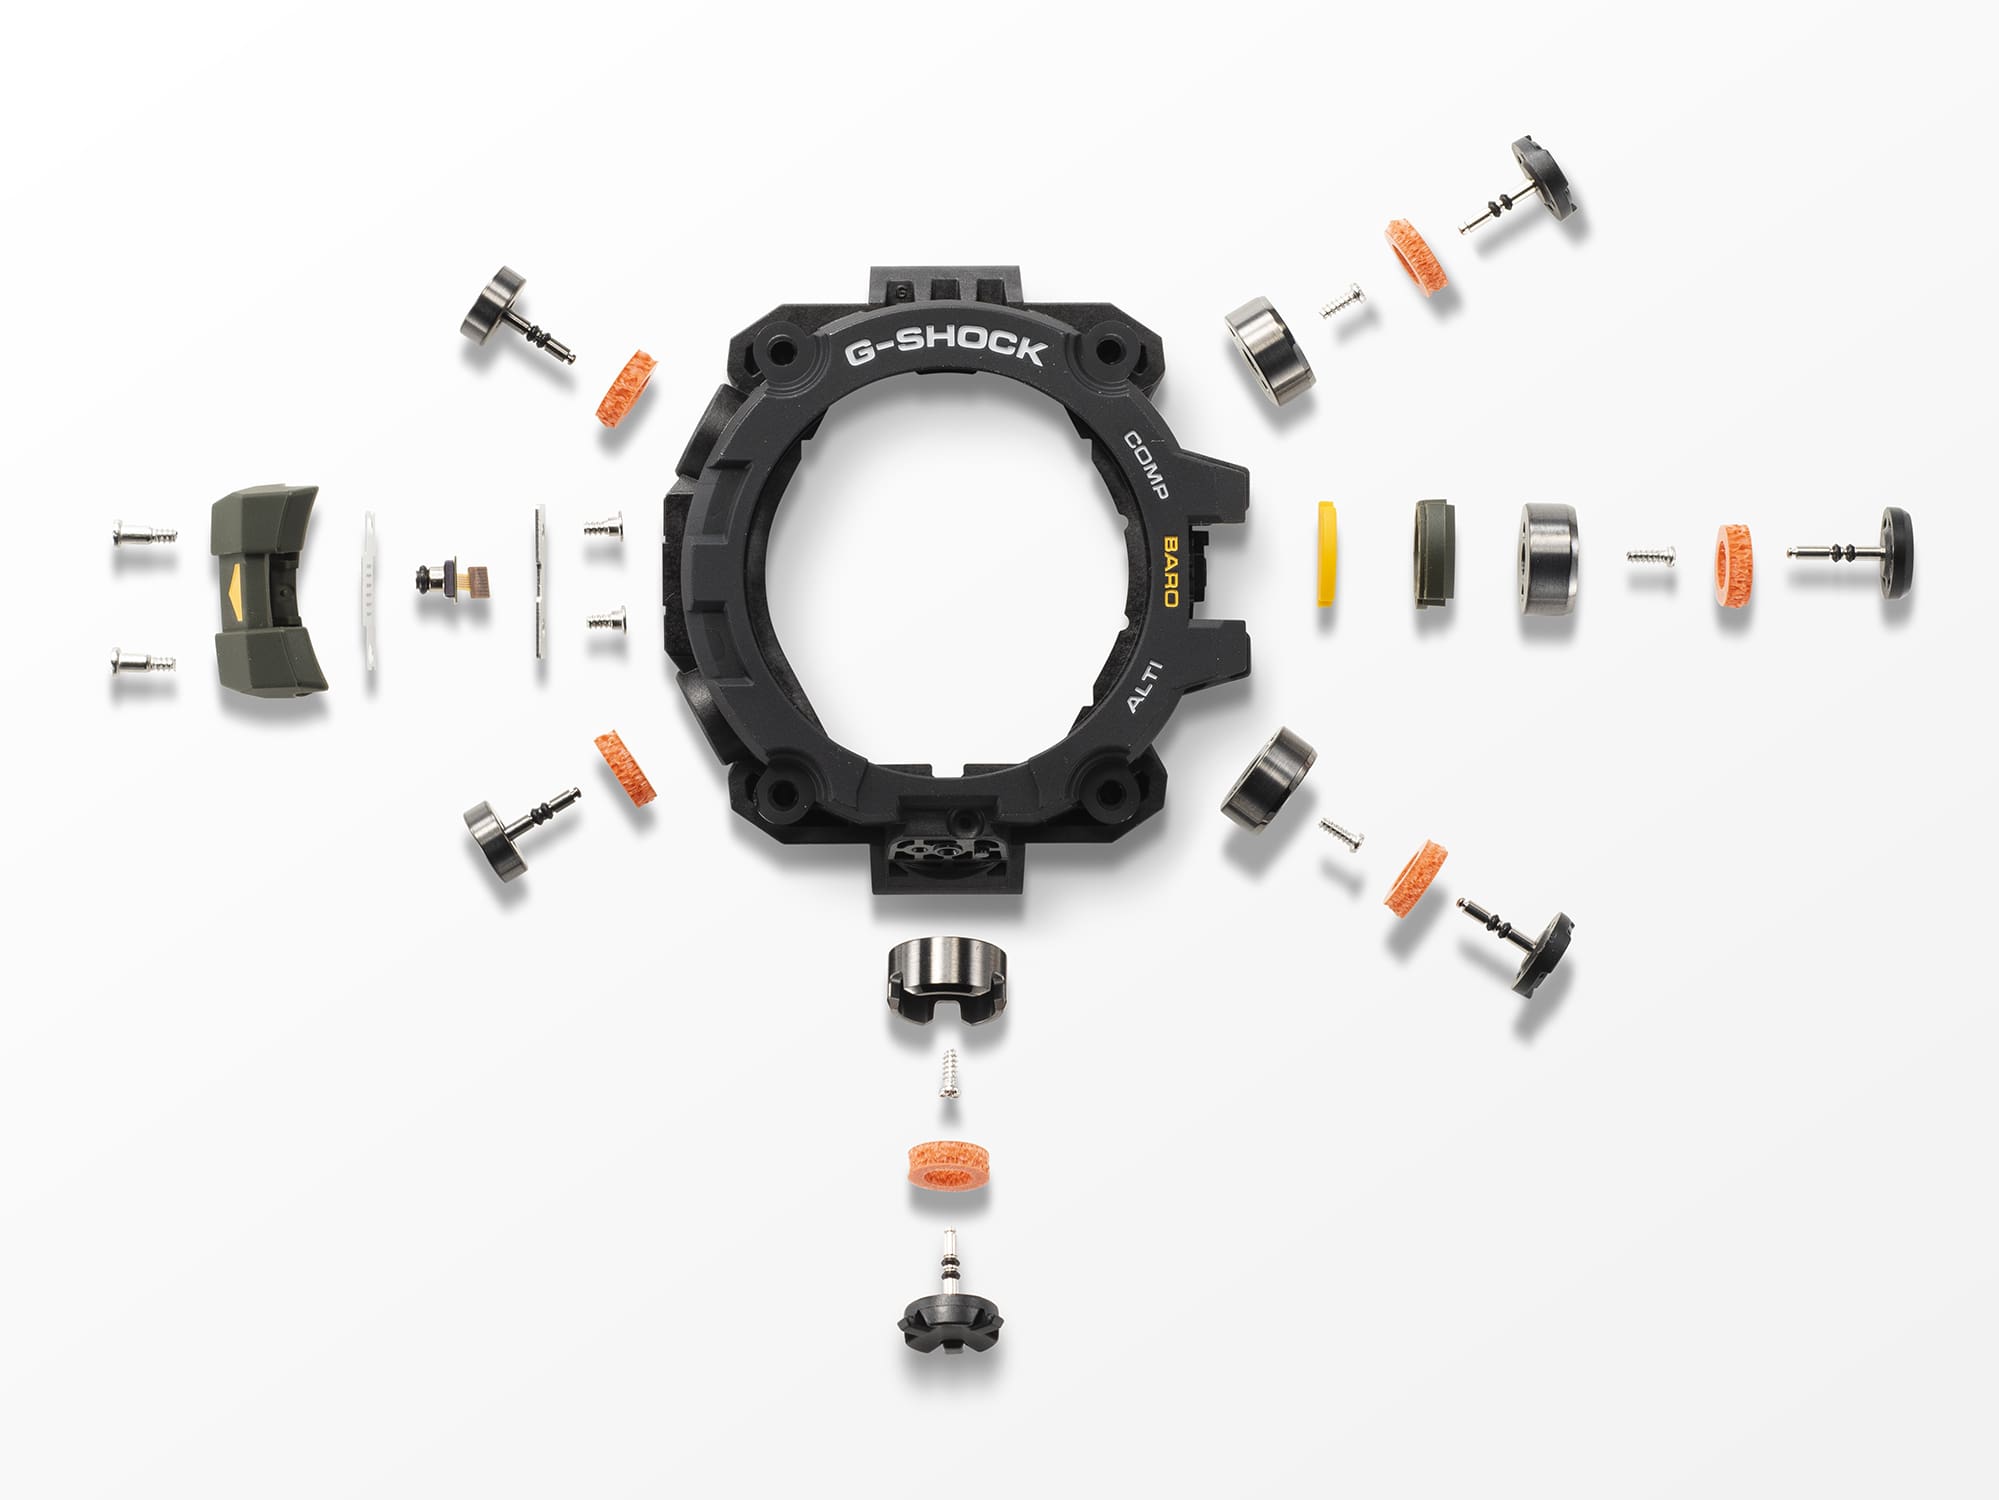 Exploded view of G-SHOCK MUDMAN GW-9500 Digital watch components